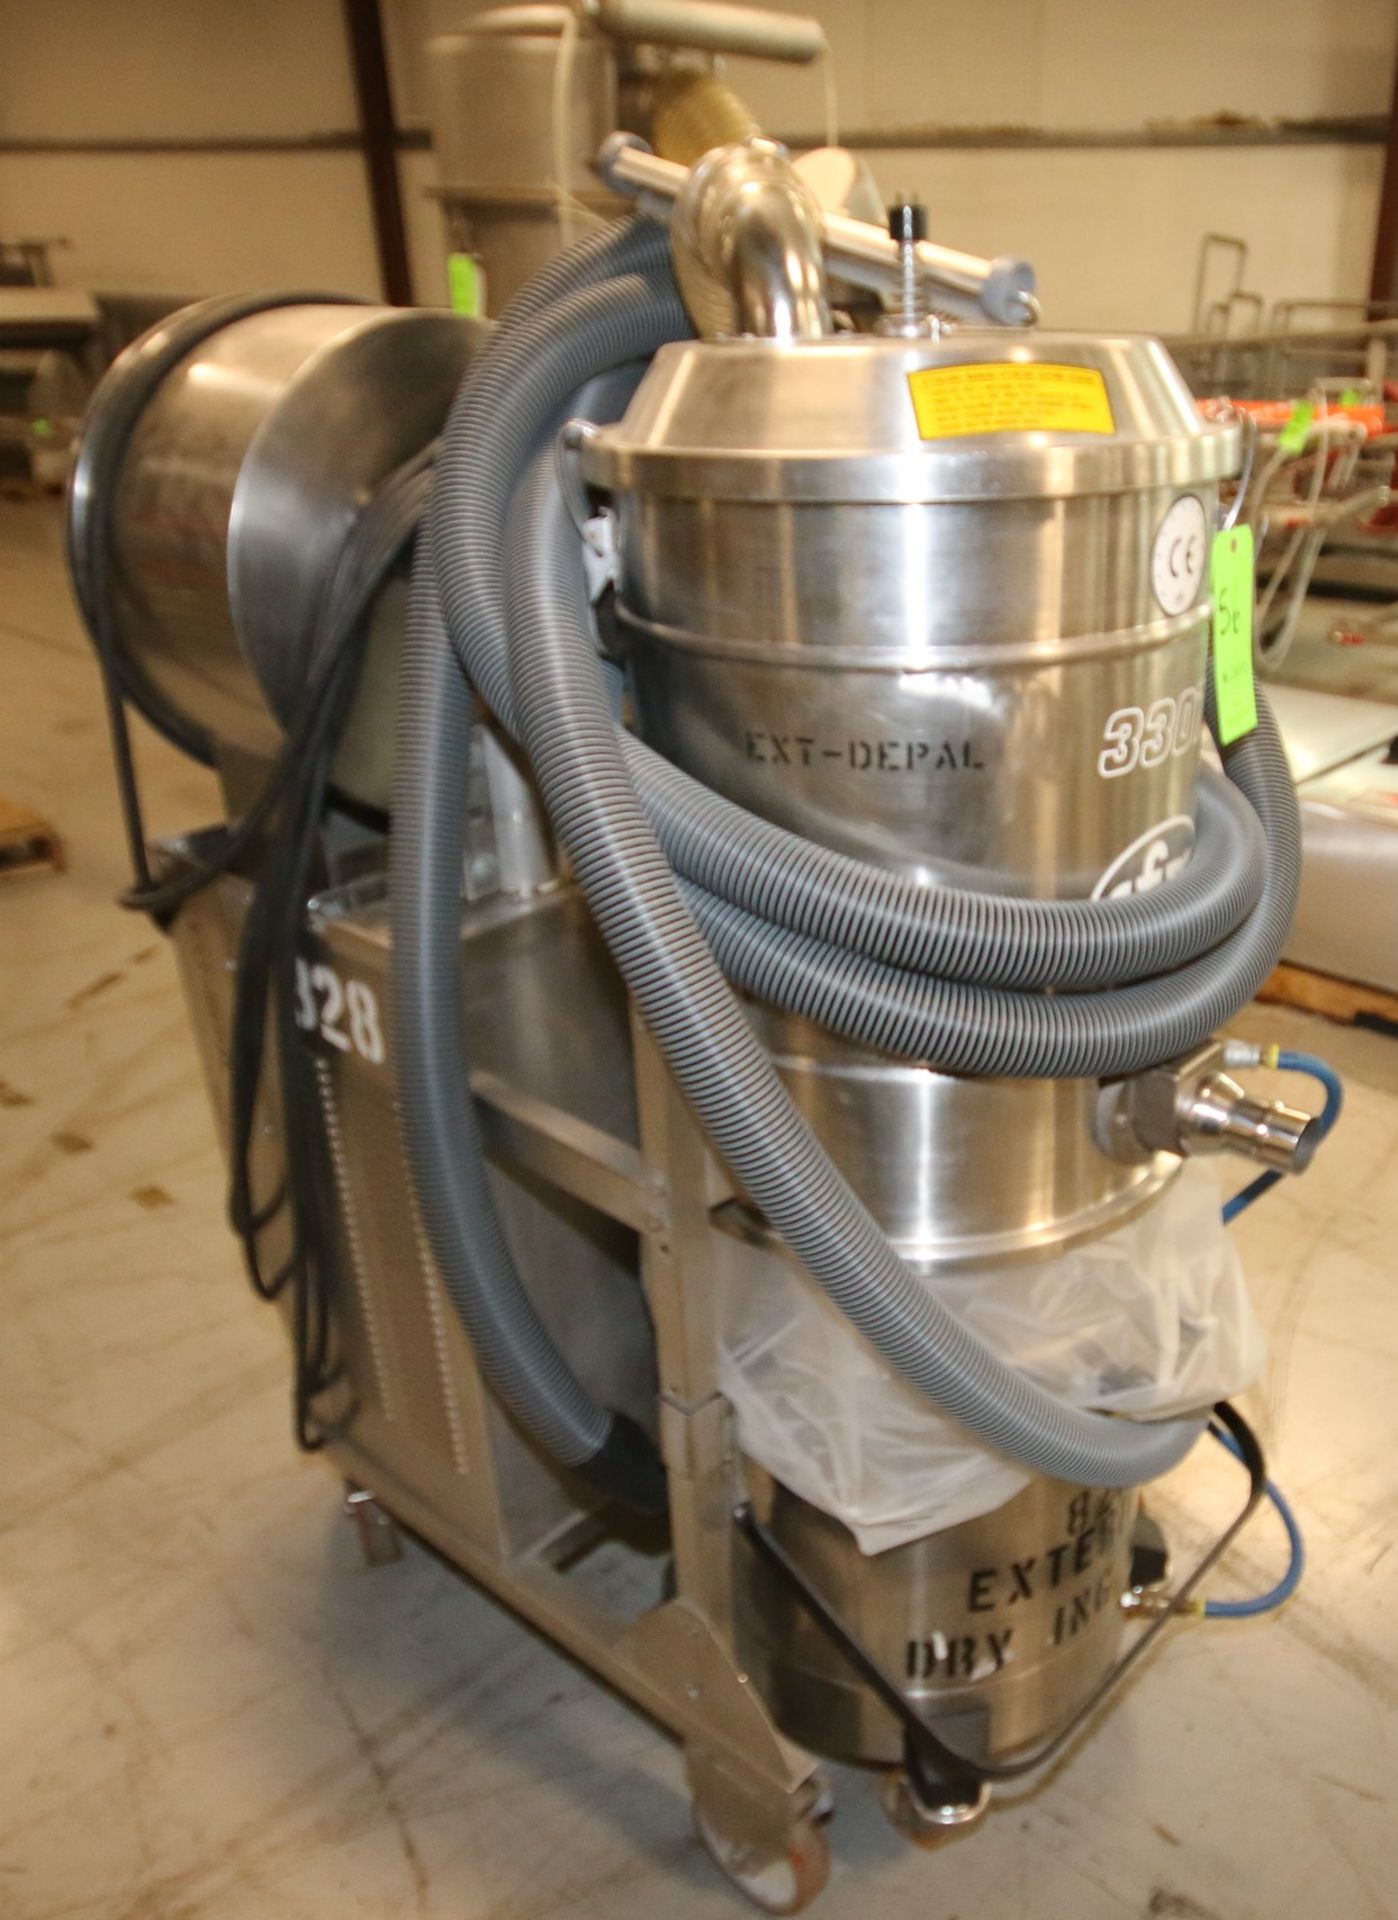 CFM Portable S/S Industrial Vacuum, Model 3307 AXXX, SN 07AB731, 440V 3 Phase with Hose (W439) - Image 2 of 4